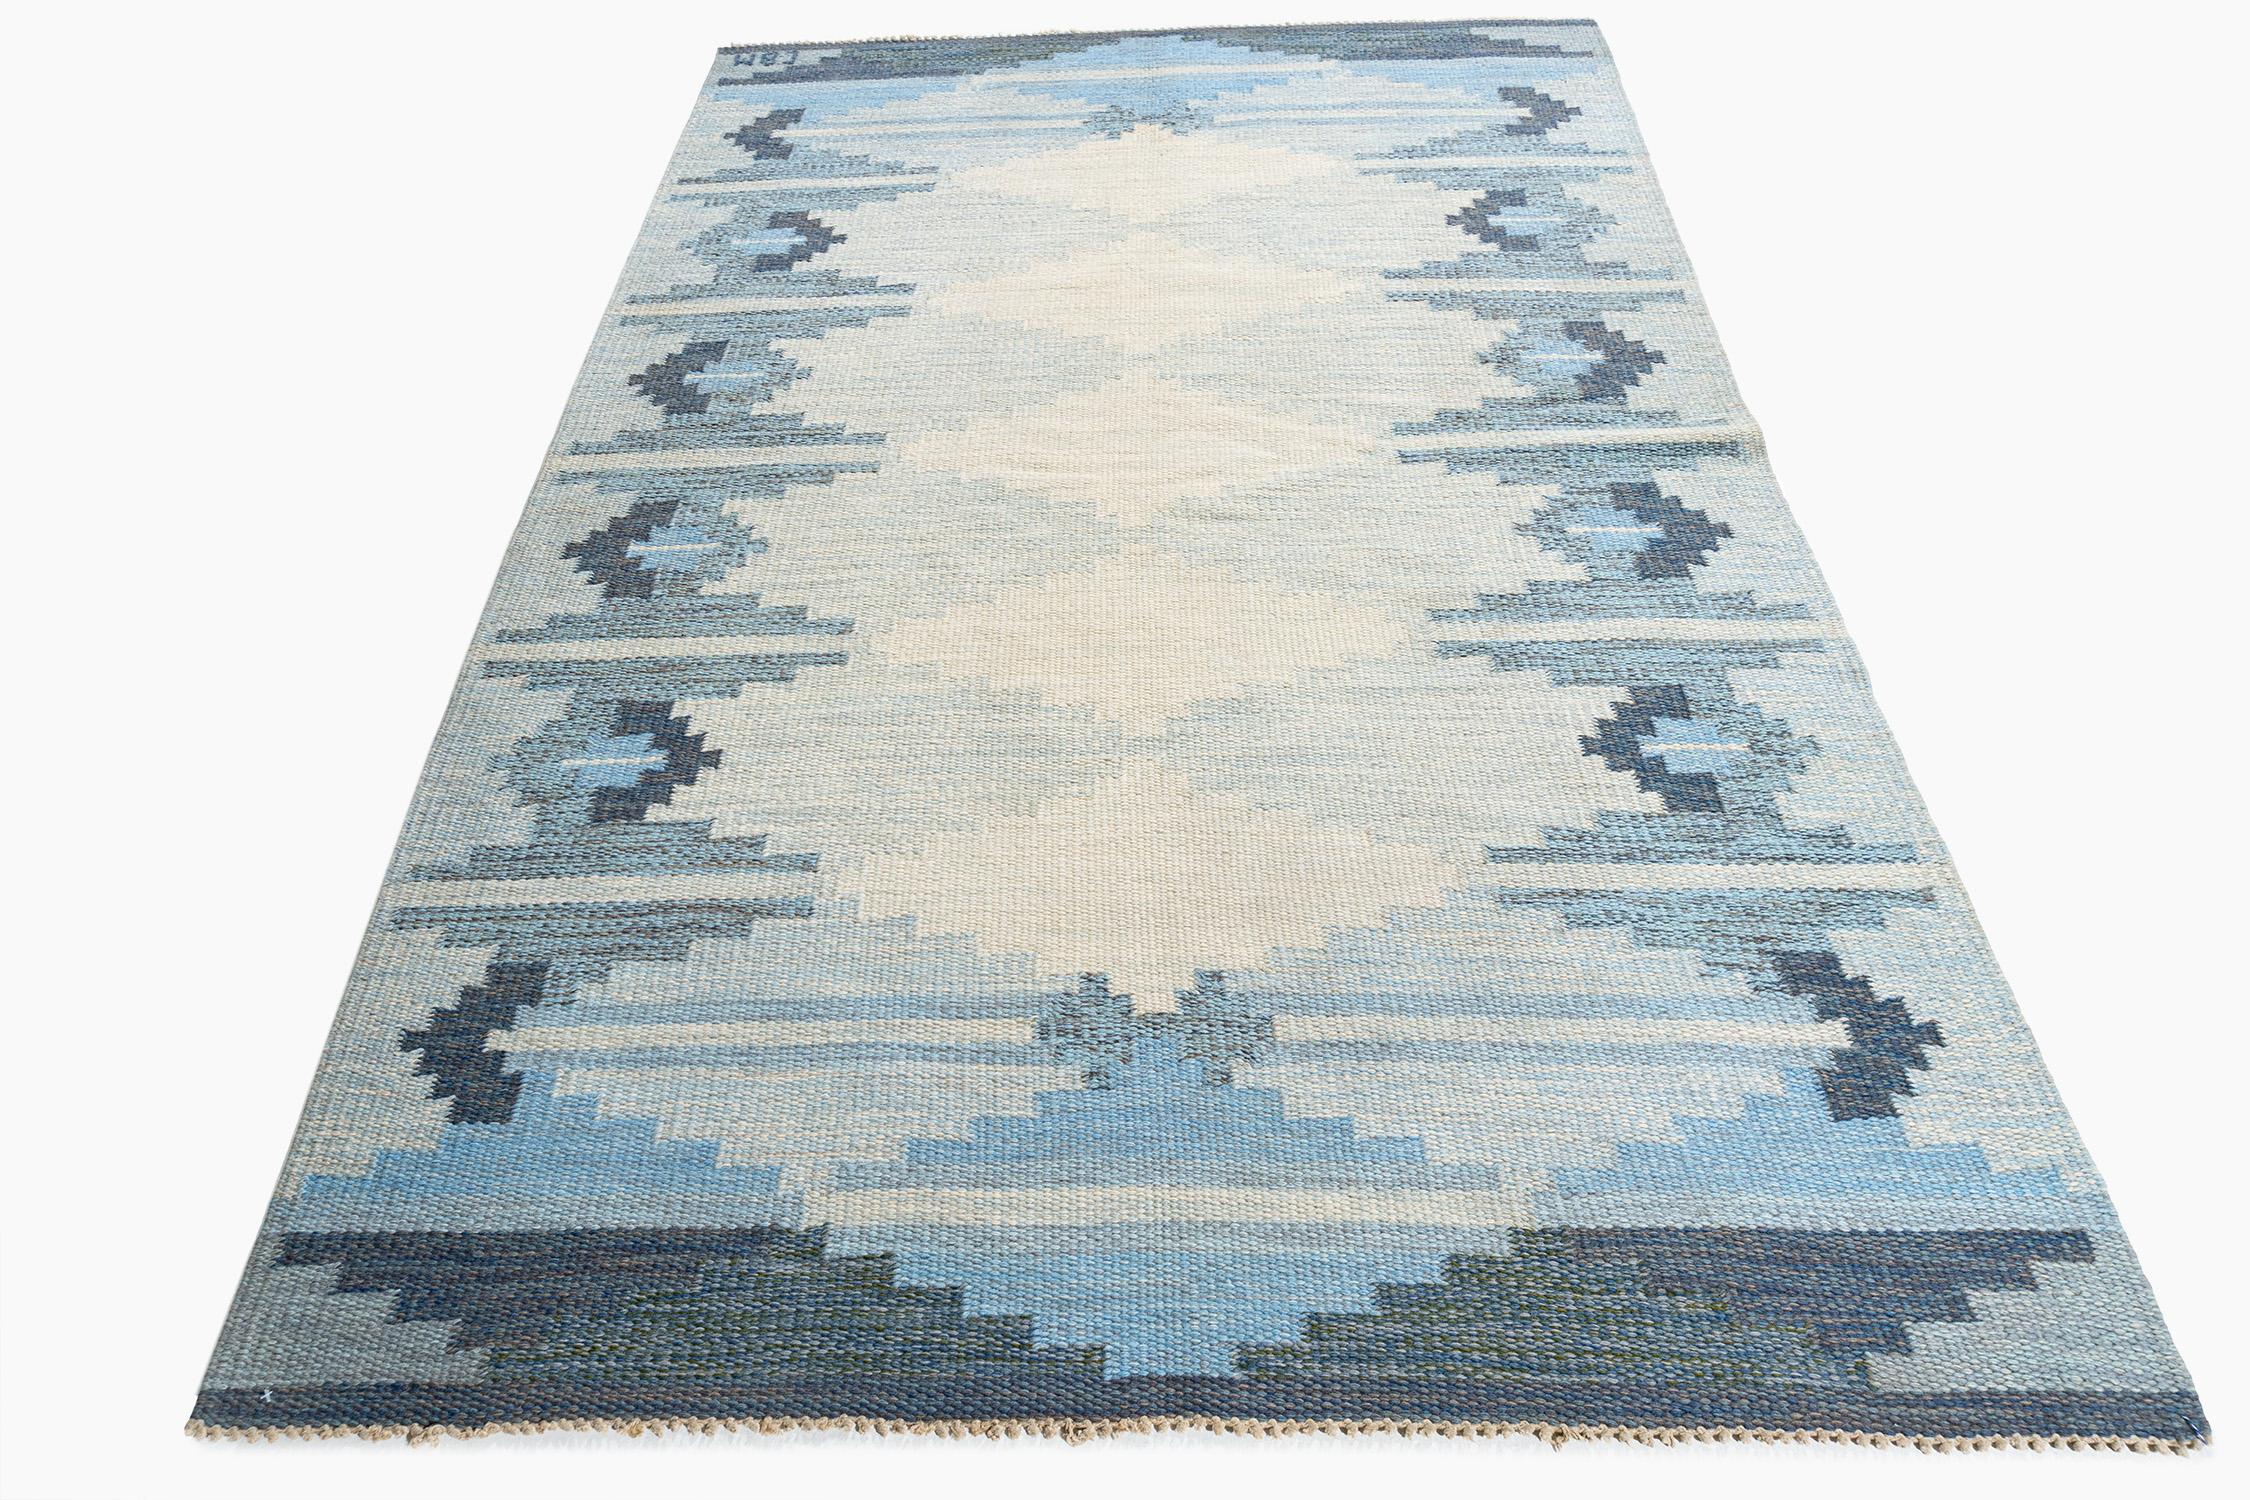 Vintage Swedish Scandinavian Area rug 4'6 X 6'10. A delightful mid-century circa 1960 Scandinavian hand knotted rug with wonderful colors woven into the design. Colors: shades of pale sky blue/slate blue/gray-blue.
 